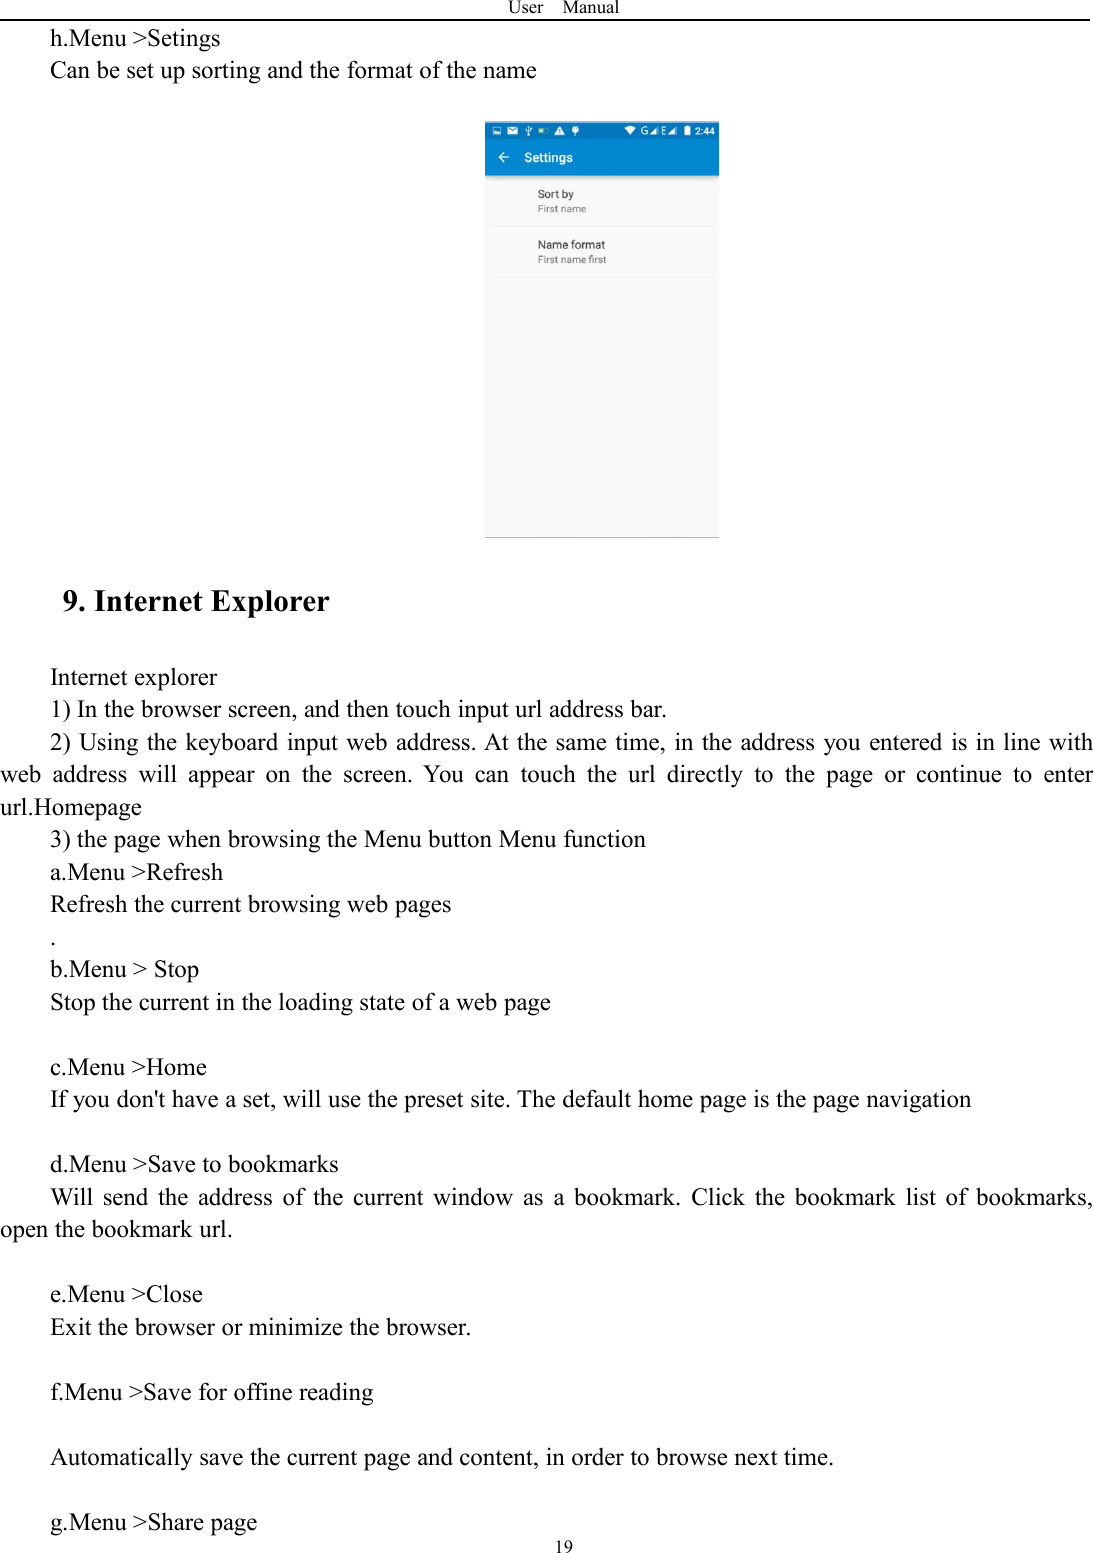 User Manual19h.Menu &gt;SetingsCan be set up sorting and the format of the name9. Internet ExplorerInternet explorer1) In the browser screen, and then touch input url address bar.2) Using the keyboard input web address. At the same time, in the address you entered is in line withweb address will appear on the screen. You can touch the url directly to the page or continue to enterurl.Homepage3) the page when browsing the Menu button Menu functiona.Menu &gt;RefreshRefresh the current browsing web pages.b.Menu &gt; StopStop the current in the loading state of a web pagec.Menu &gt;HomeIf you don&apos;t have a set, will use the preset site. The default home page is the page navigationd.Menu &gt;Save to bookmarksWill send the address of the current window as a bookmark. Click the bookmark list of bookmarks,open the bookmark url.e.Menu &gt;CloseExit the browser or minimize the browser.f.Menu &gt;Save for offine readingAutomatically save the current page and content, in order to browse next time.g.Menu &gt;Share page